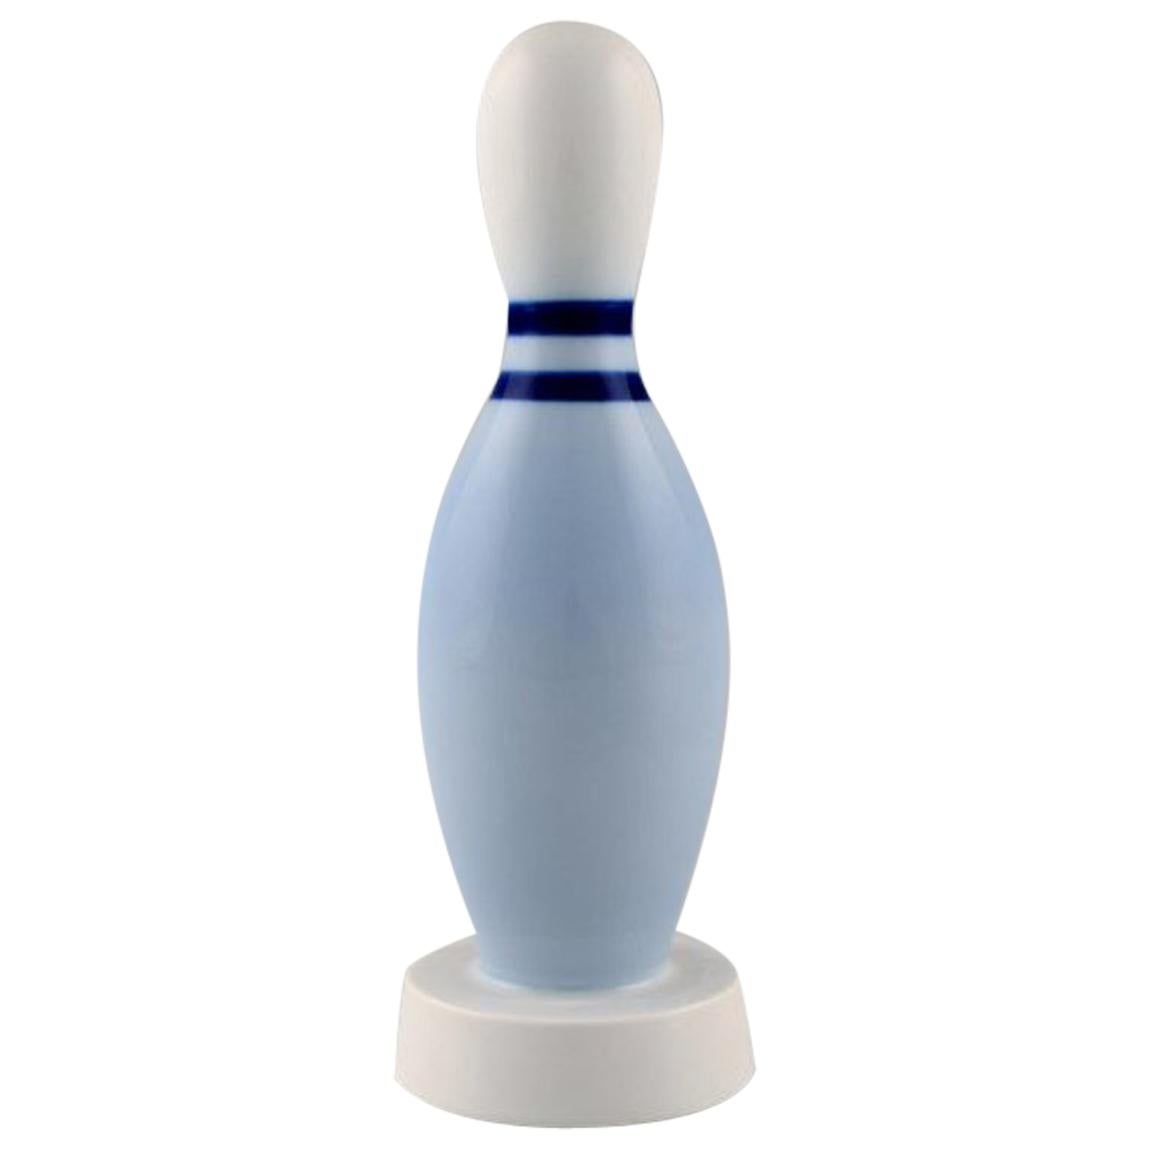 Rare B&G 'Bing & Grondahl' Bowling Pin, Model Number 6132 For Sale